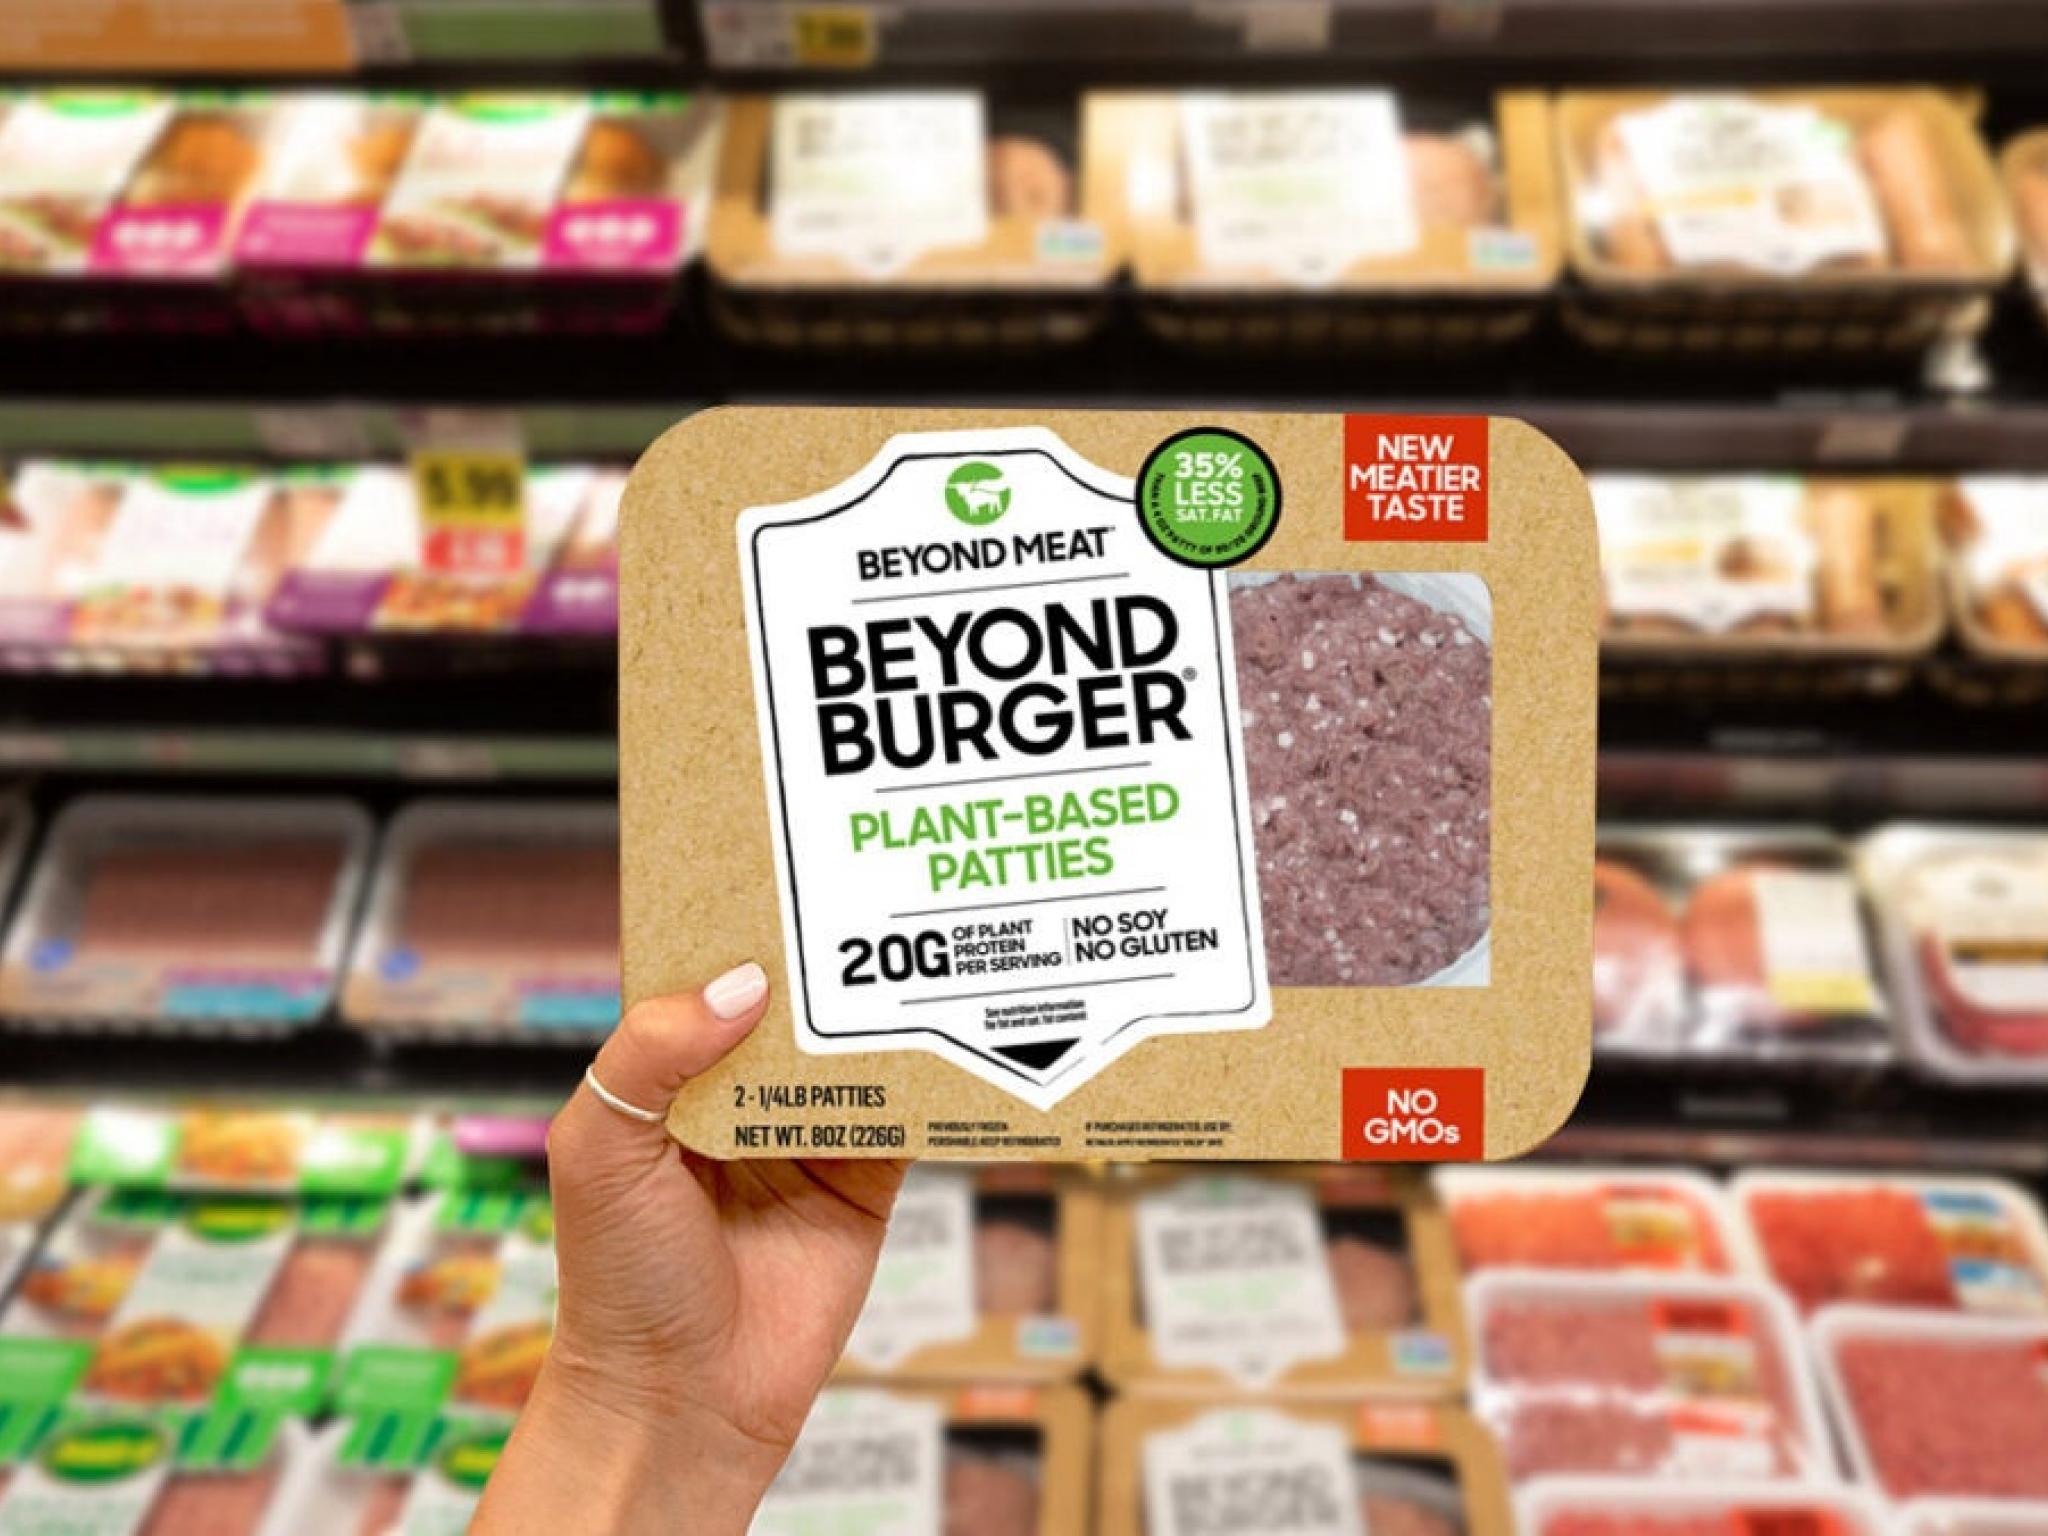  jim-cramer-beyond-meat-is-way-too-risky-warby-parker-is-alright-to-buy 